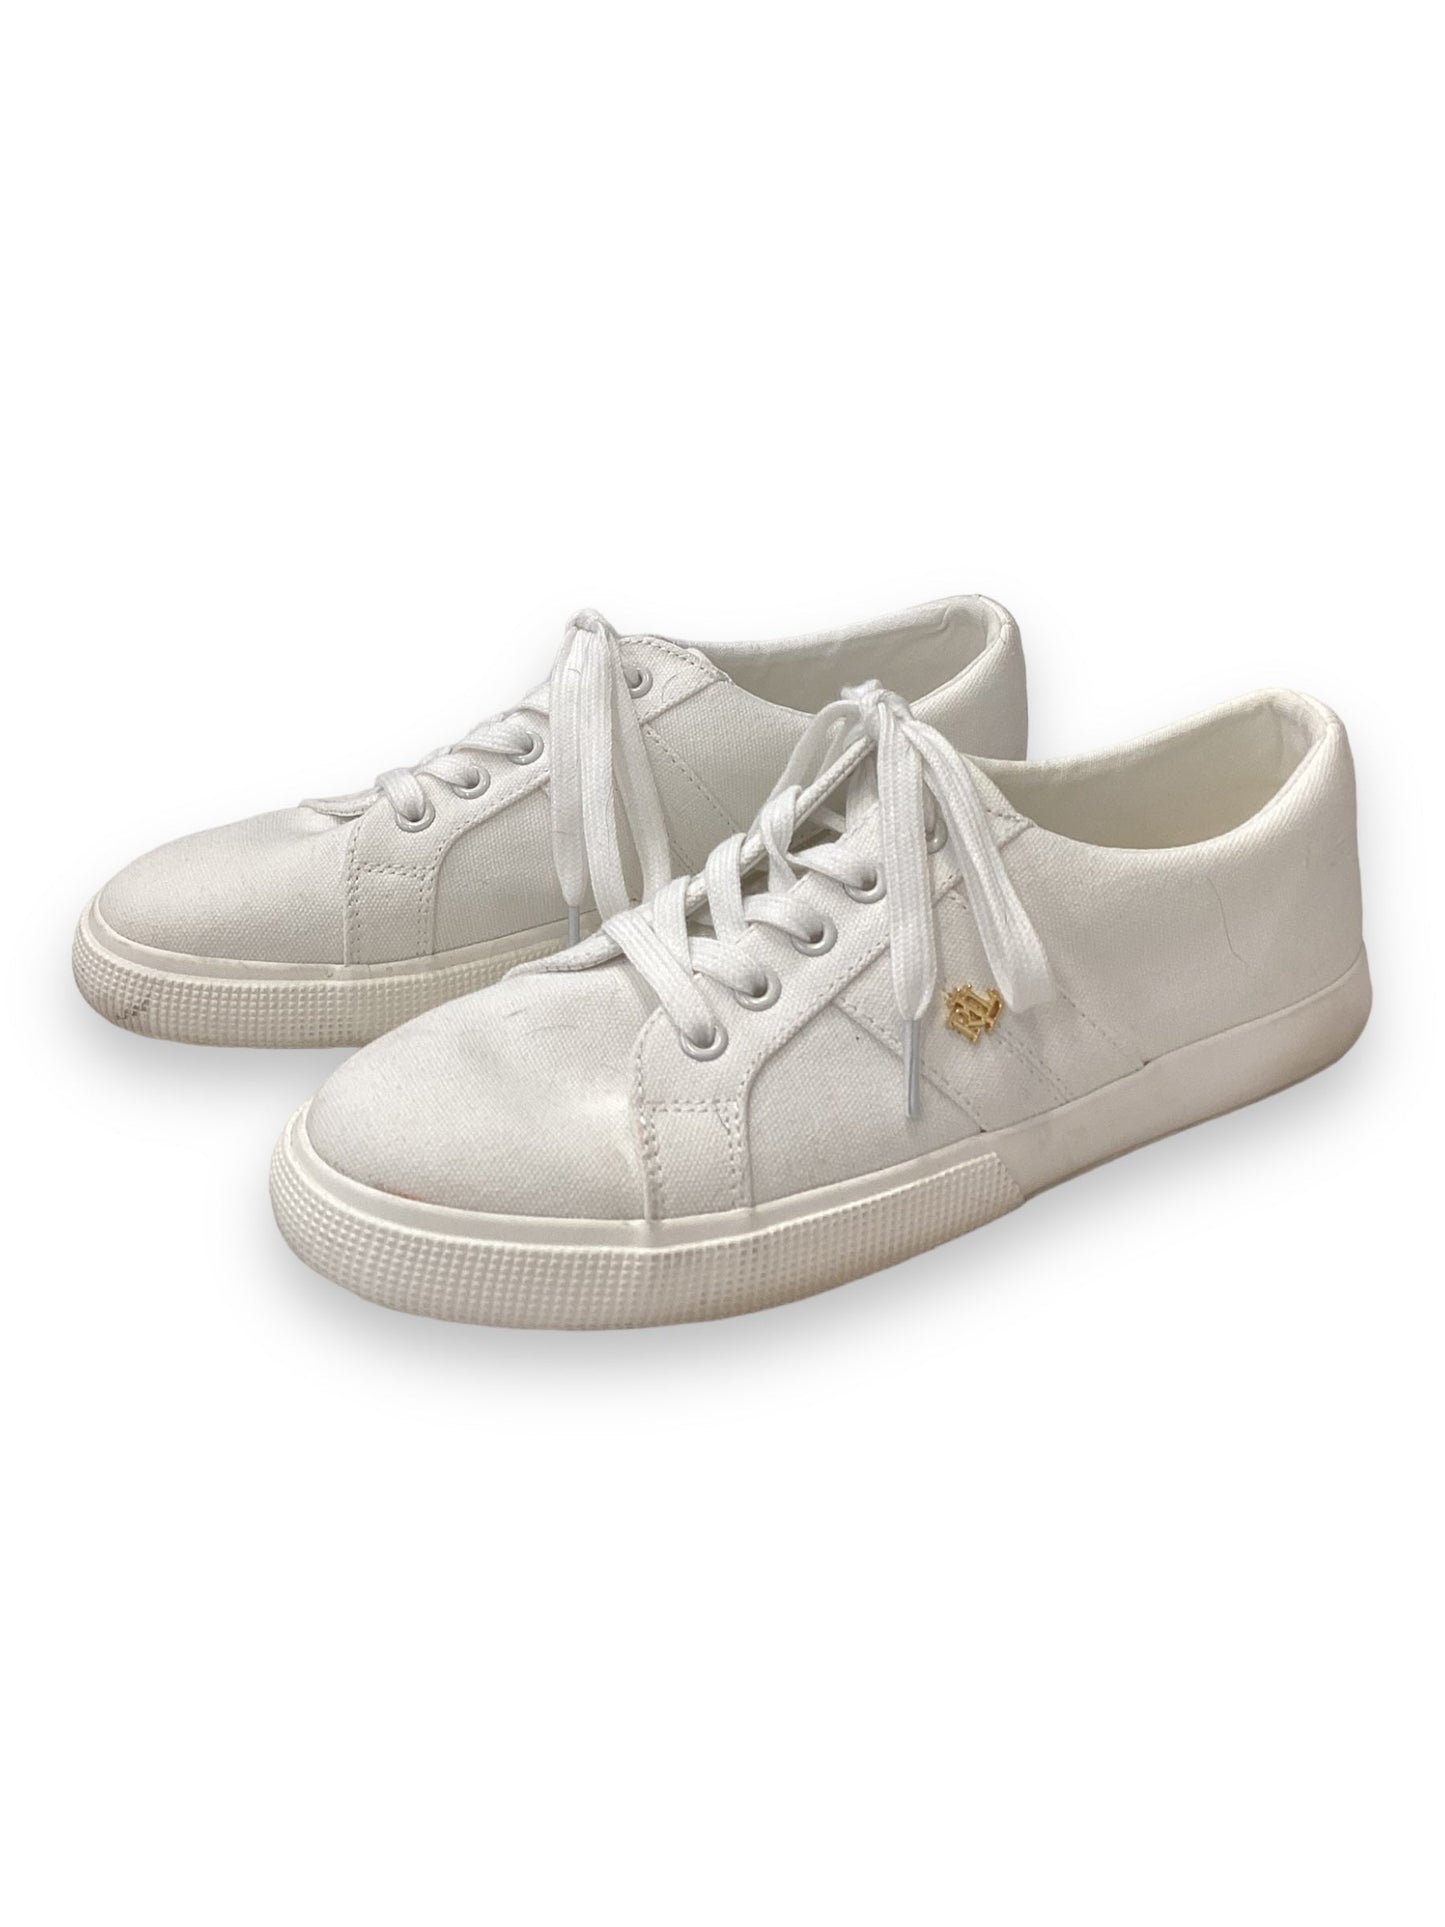 Shoes Sneakers By Ralph Lauren  Size: 9